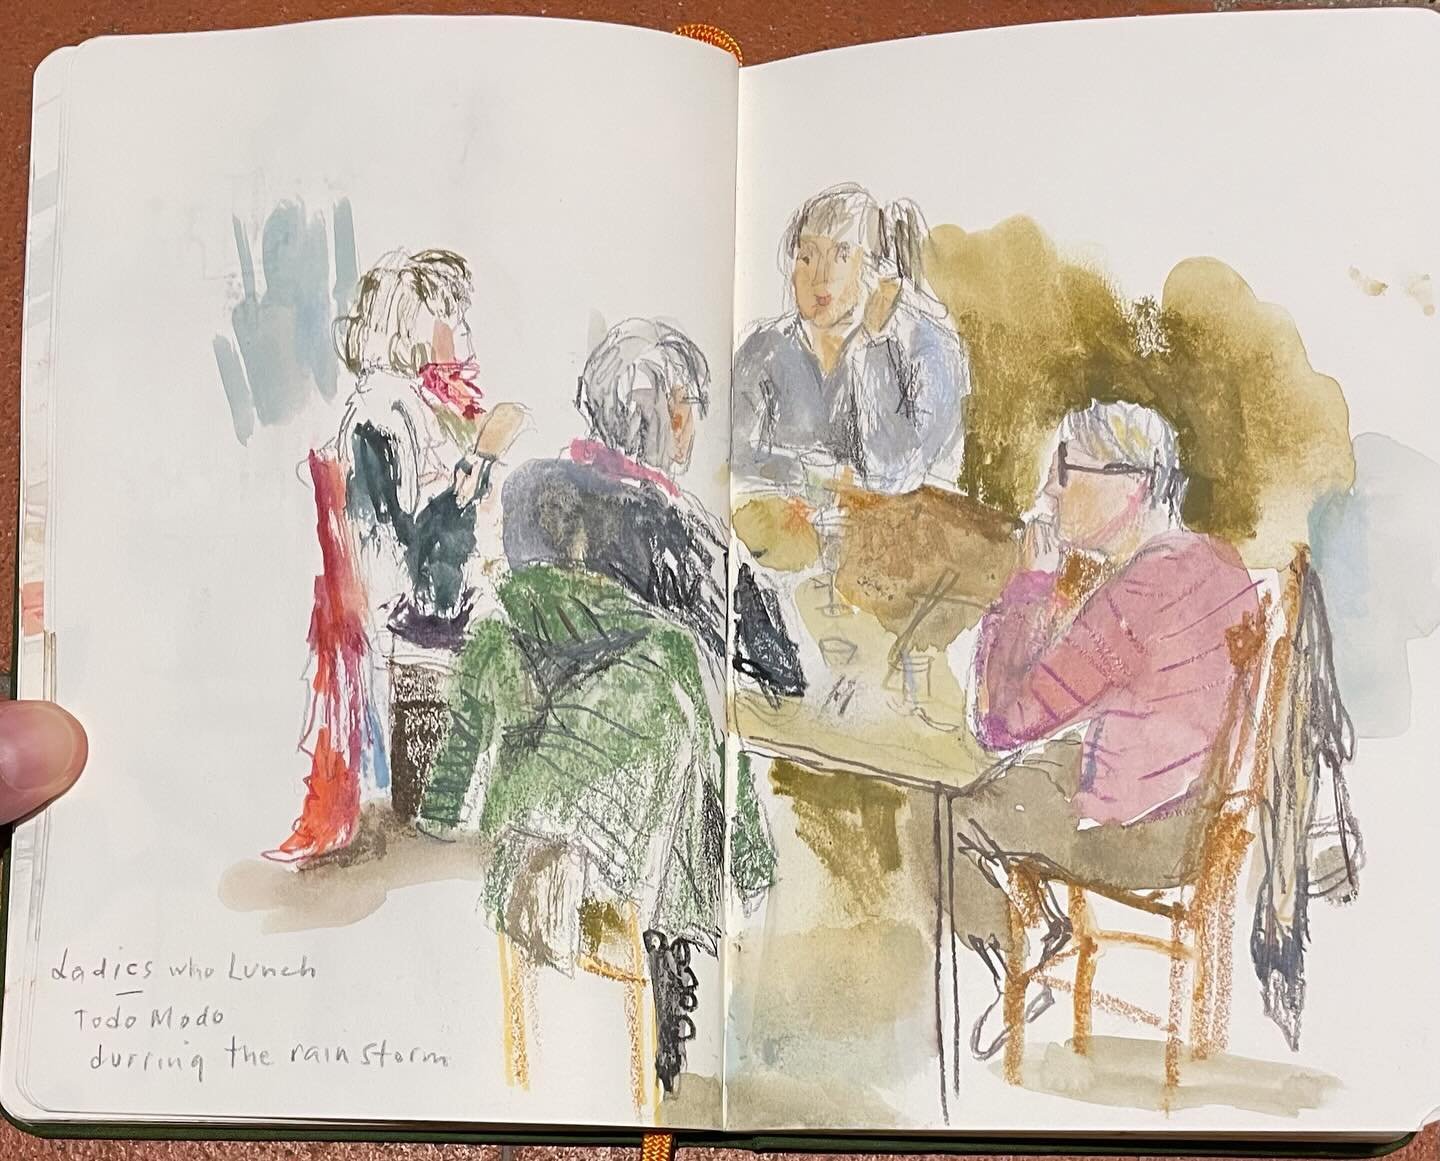 Today&rsquo;s post: here&rsquo;s some ladies who lunch, in Todo Modo bookshop in Florence. Since it was raining I ducked into this unique bookshop and settled in to draw. I took a little video of the place too. Also, I included a bit of my set up, I 